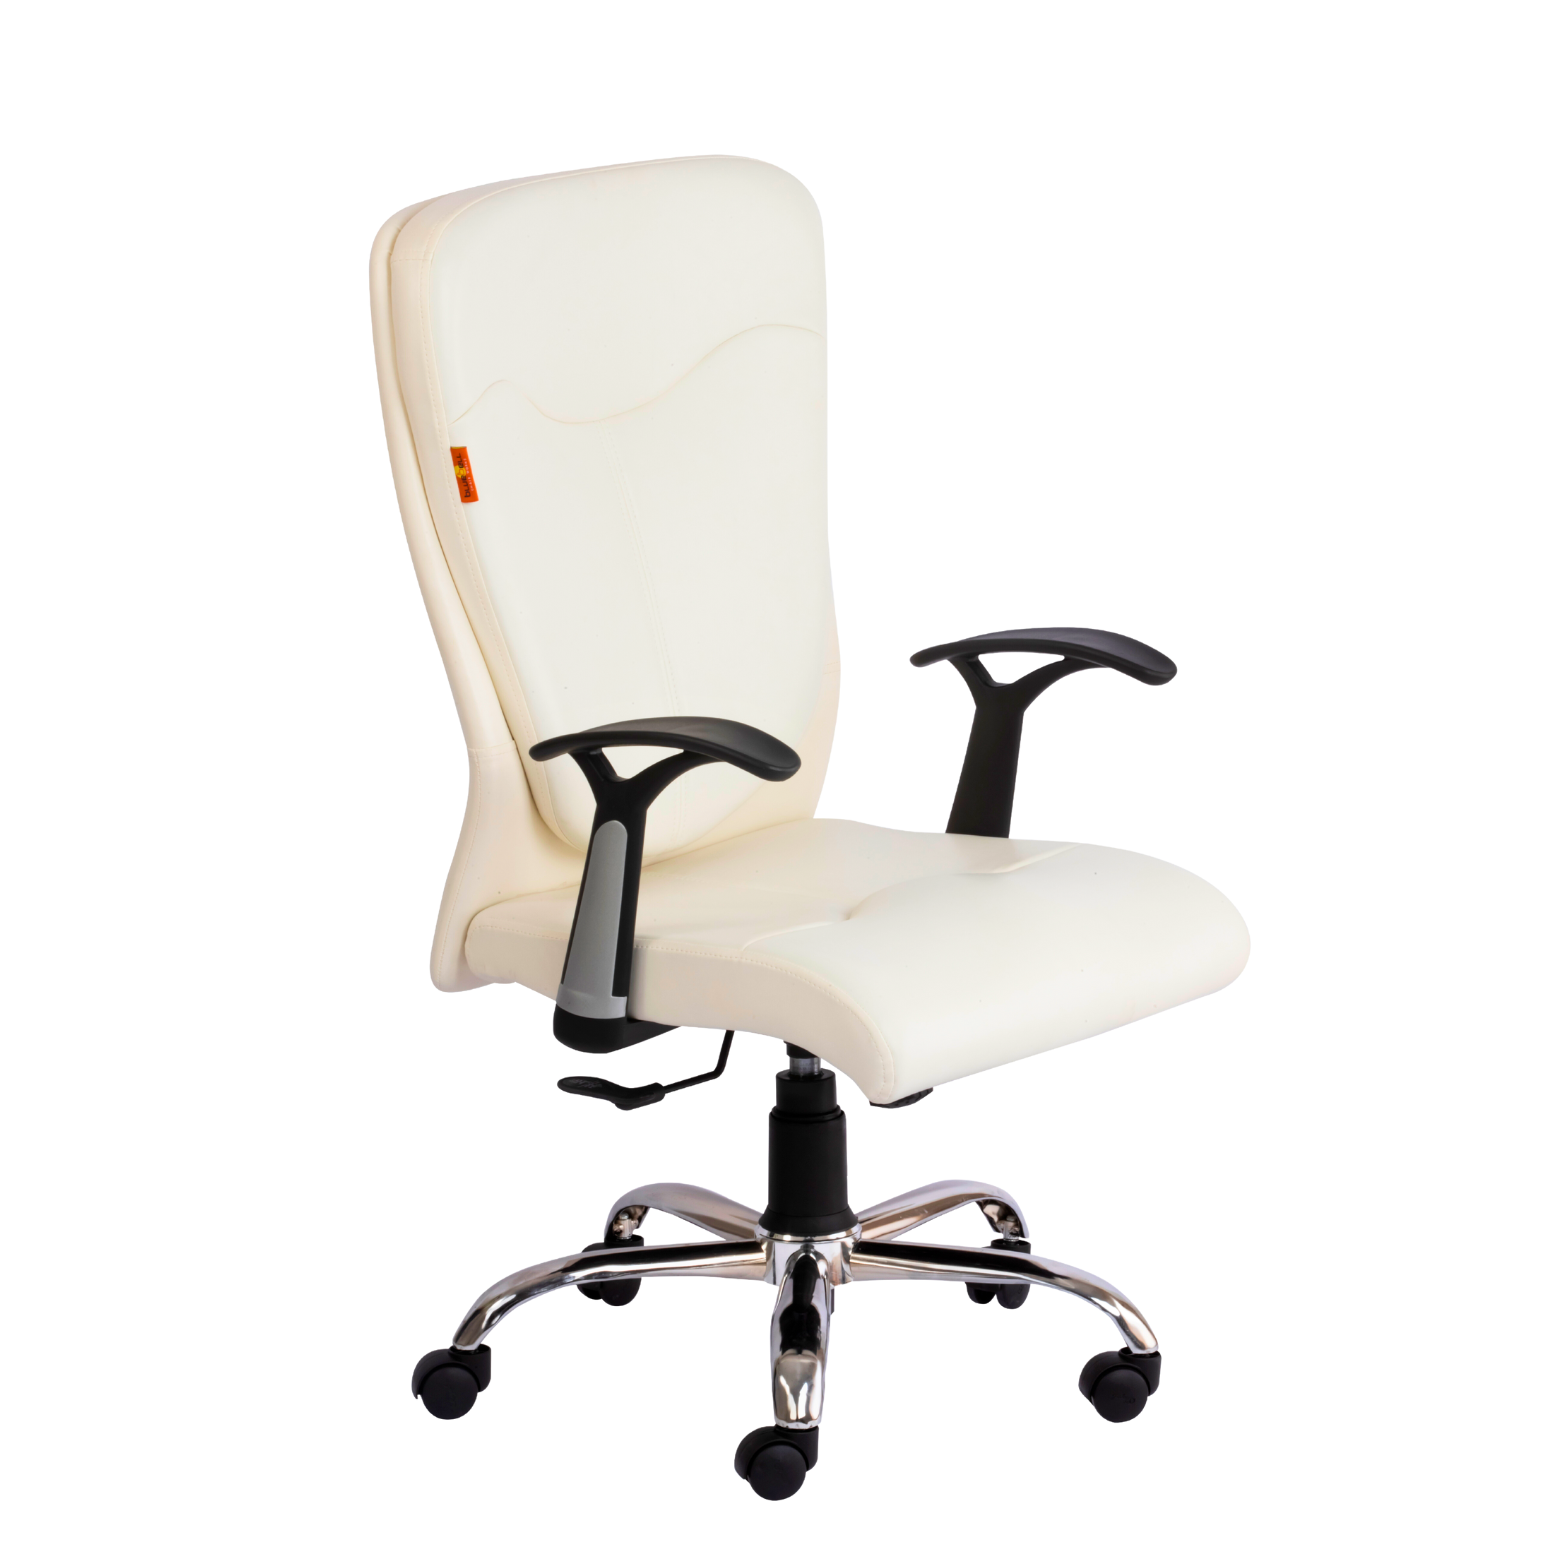 Proactive High Back Revolving Chair (Premium) - Modern Executive Office Chair with swivel function and tilting tension adjustment.